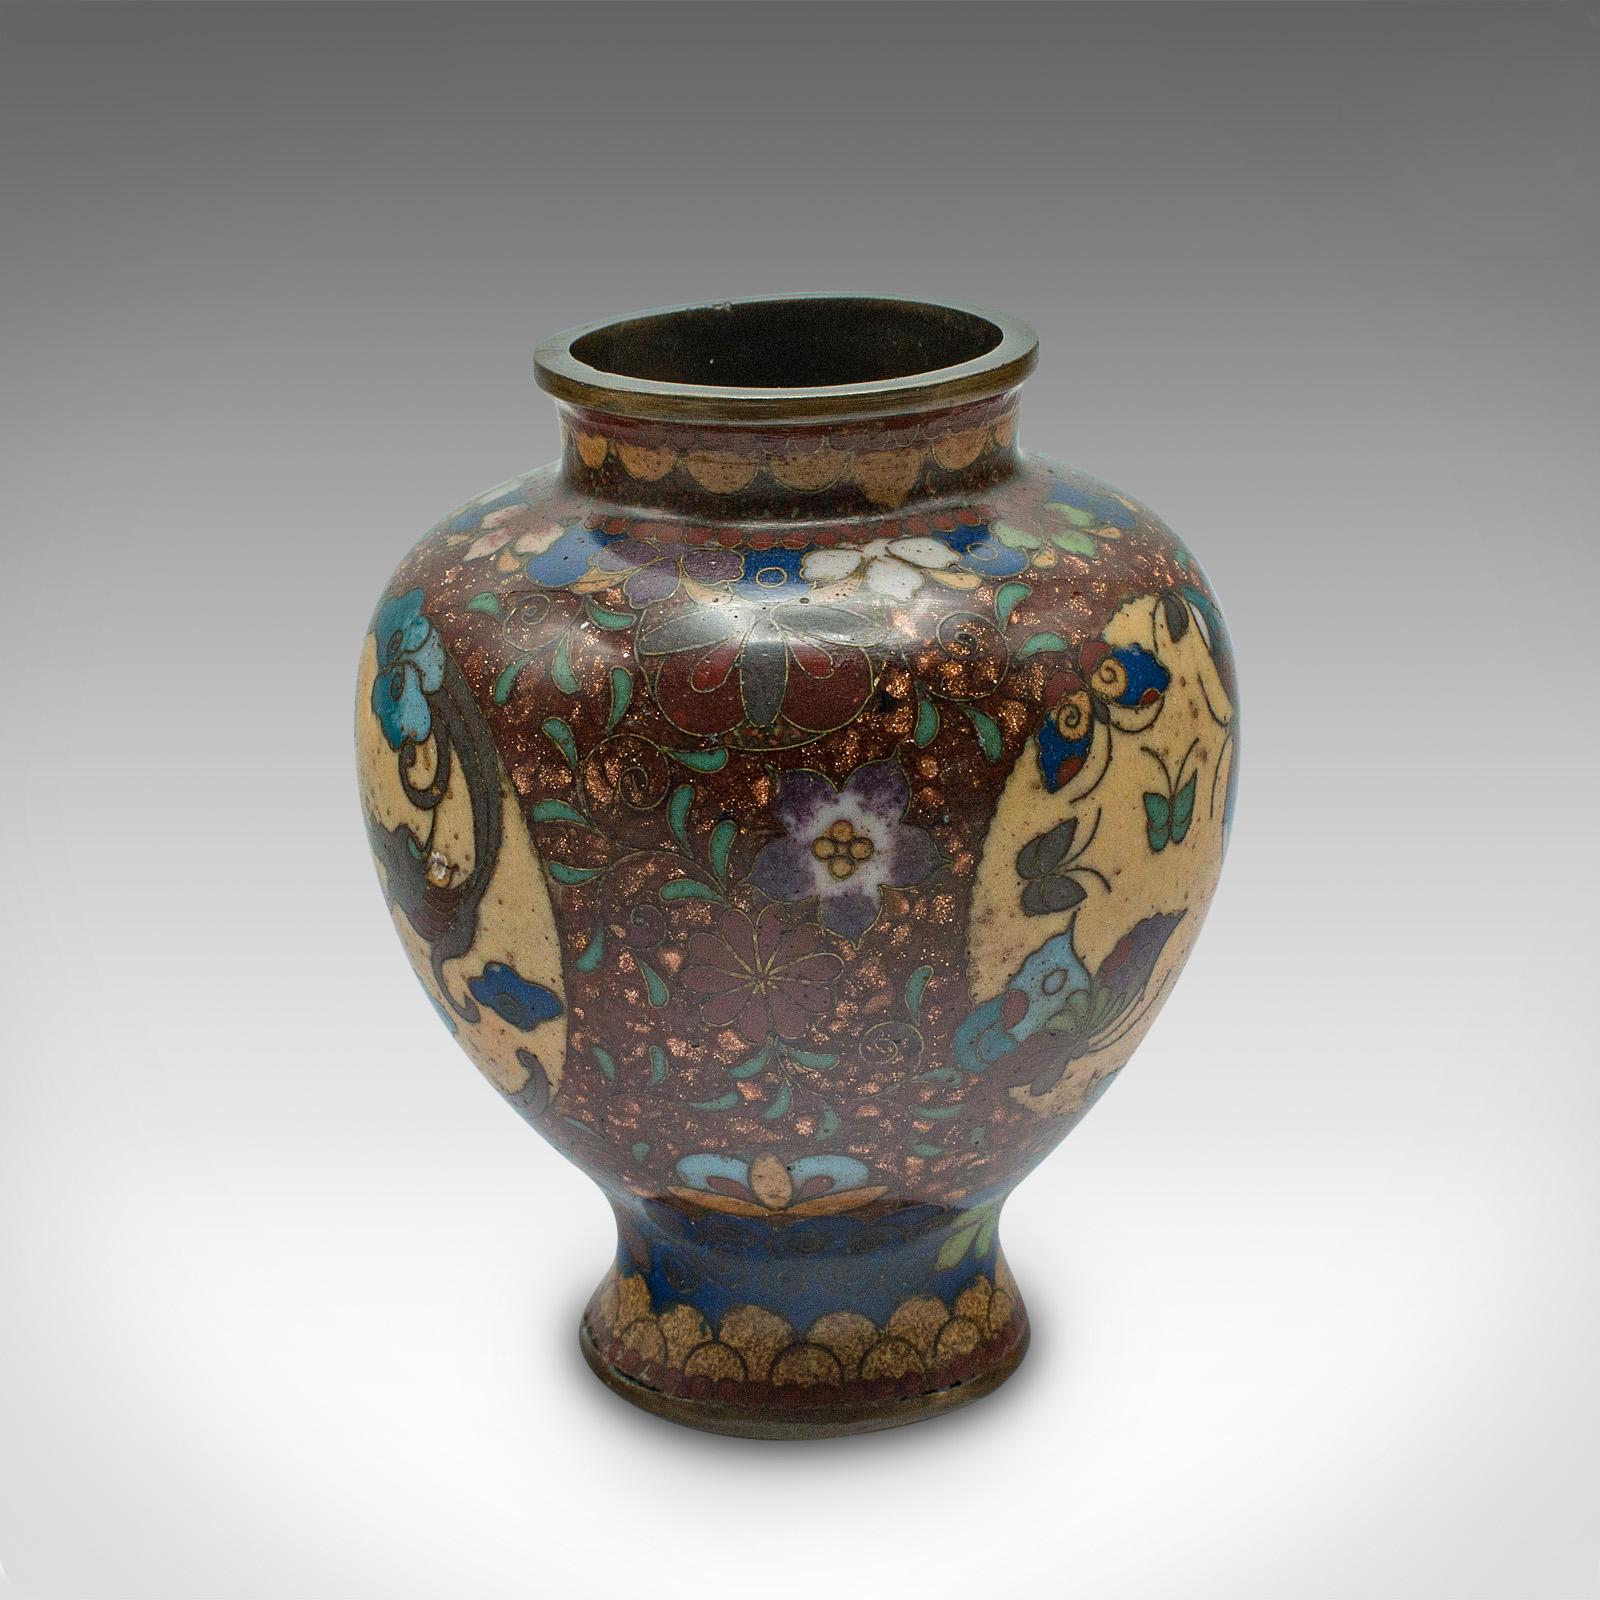 20th Century Small Vintage Posy Vase, Chinese, Cloisonne, Display Urn, Art Deco, Circa 1940 For Sale